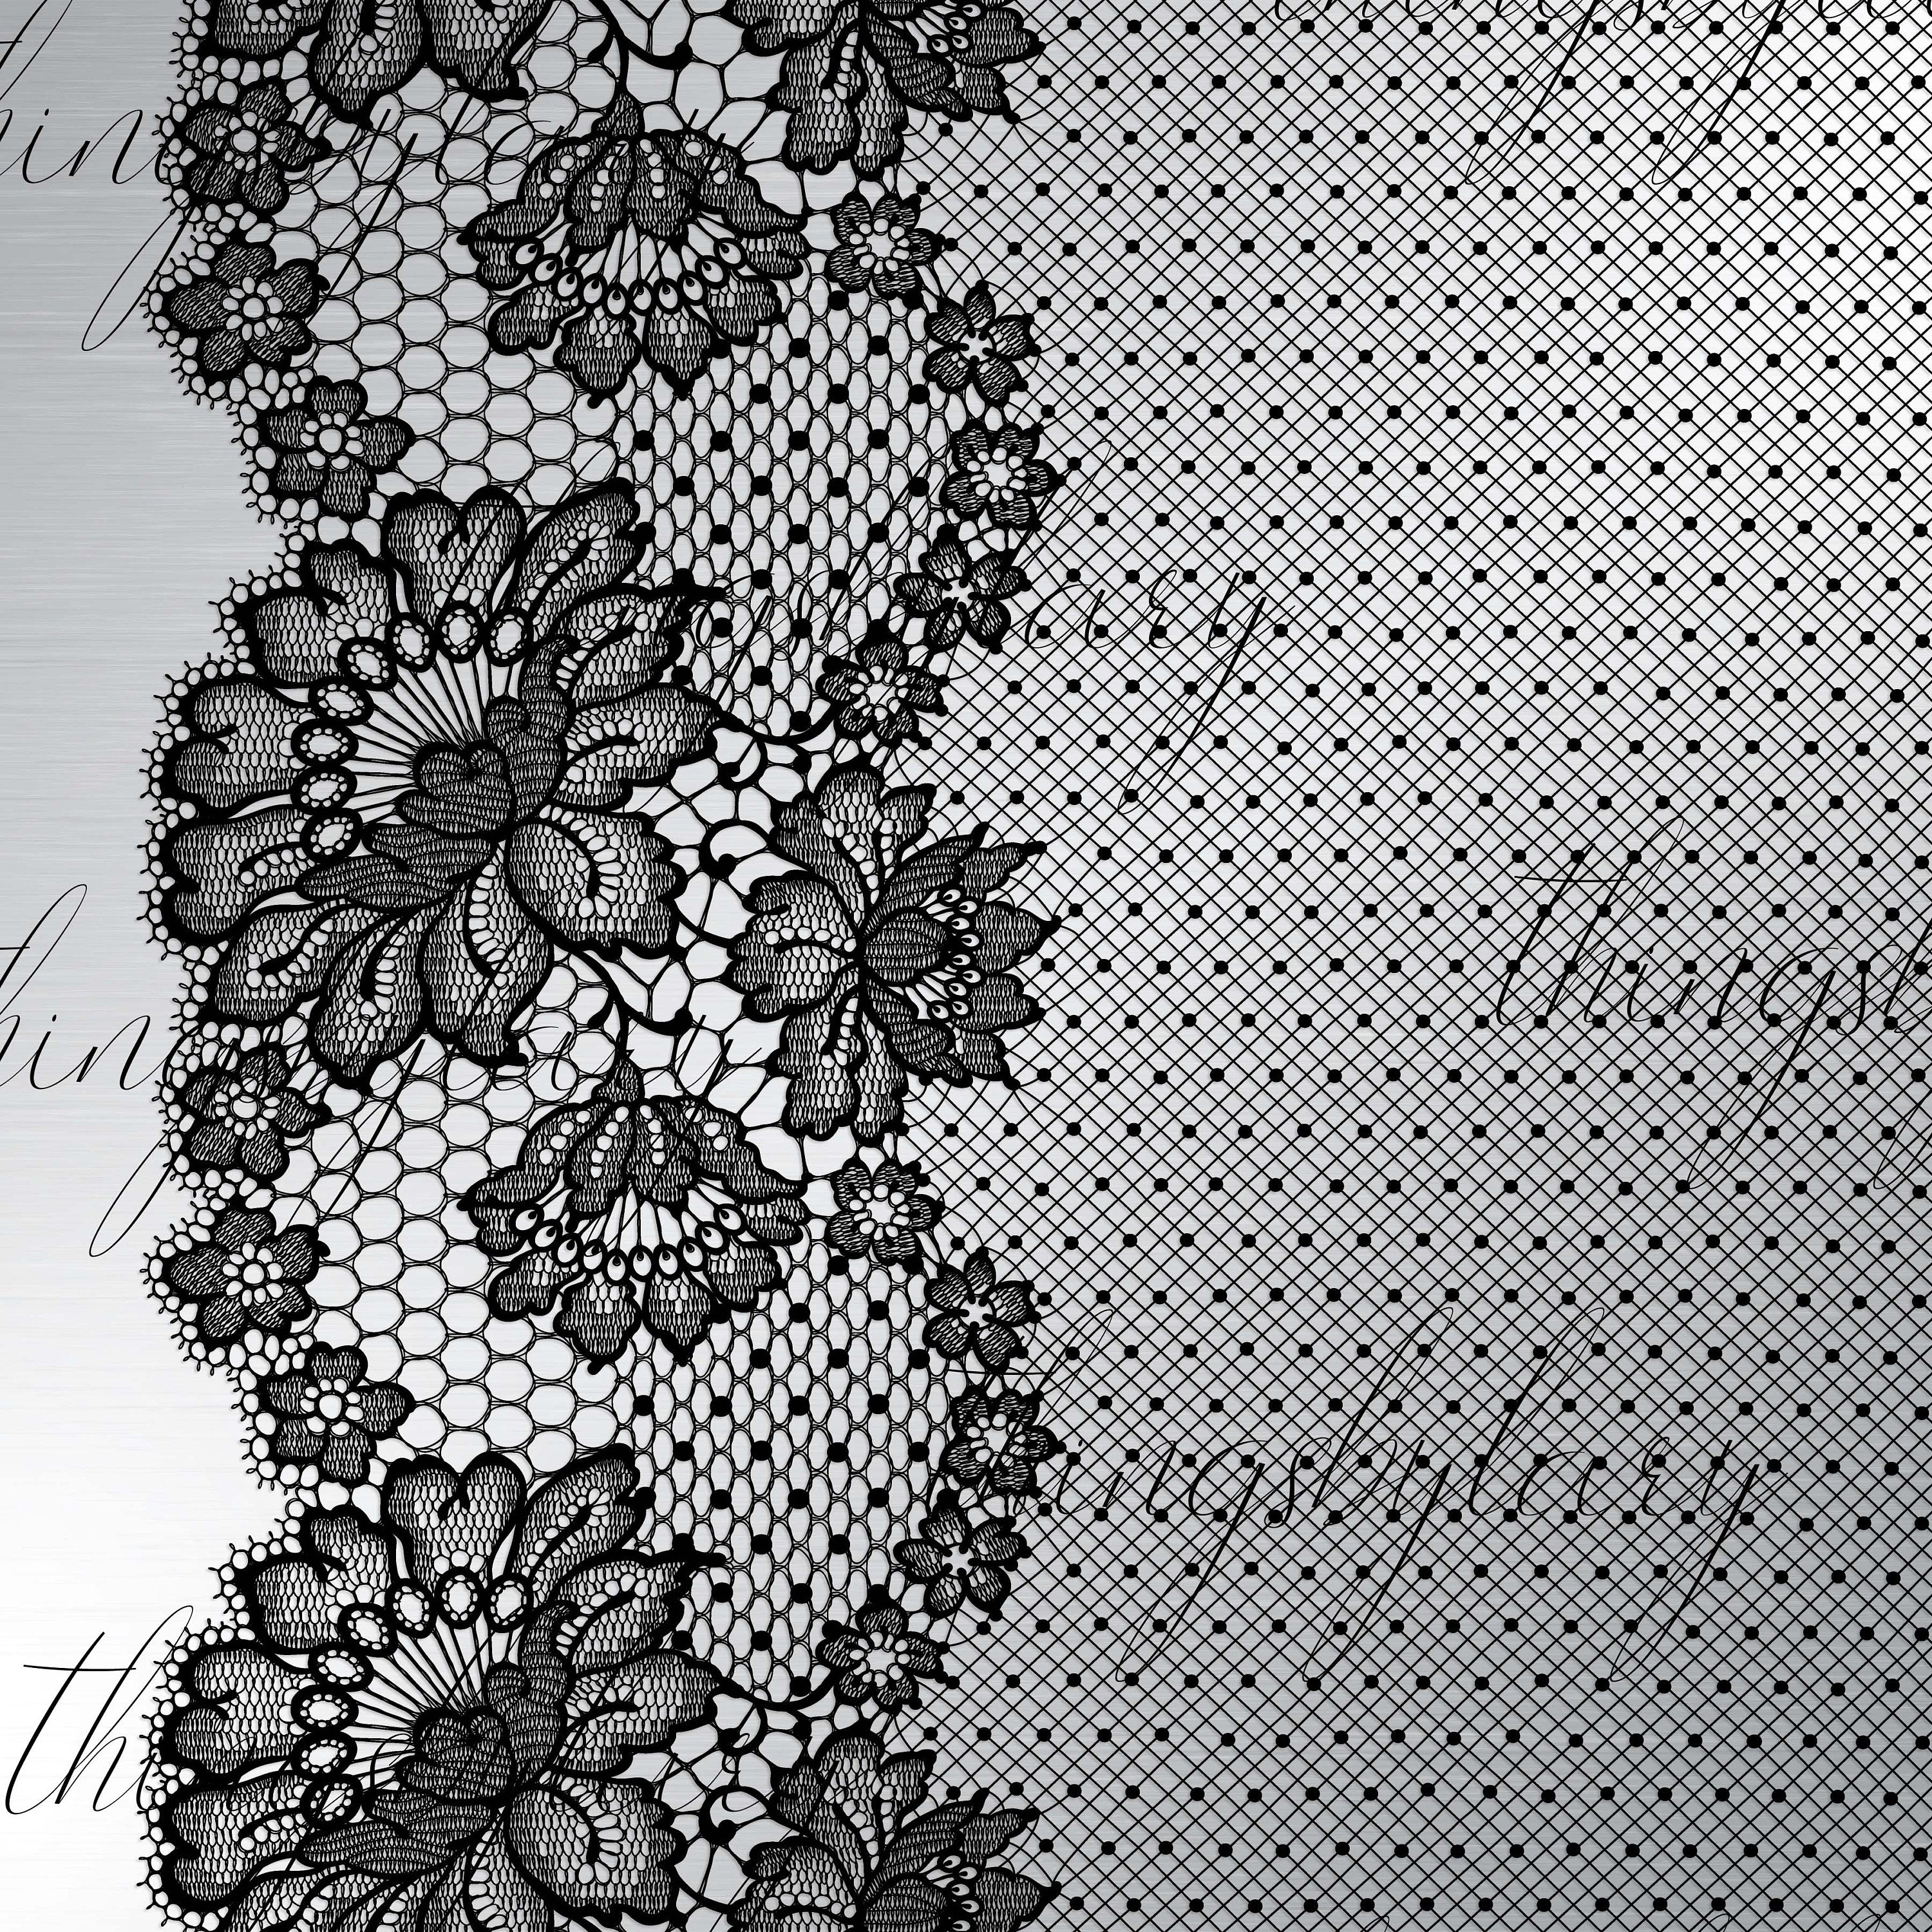 27 Black Lace Overlays Borders Frames Images PNG Transparent 300 Dpi Instant Download Commercial Use Shabby Chic Gothic Black Widow Lacy Net